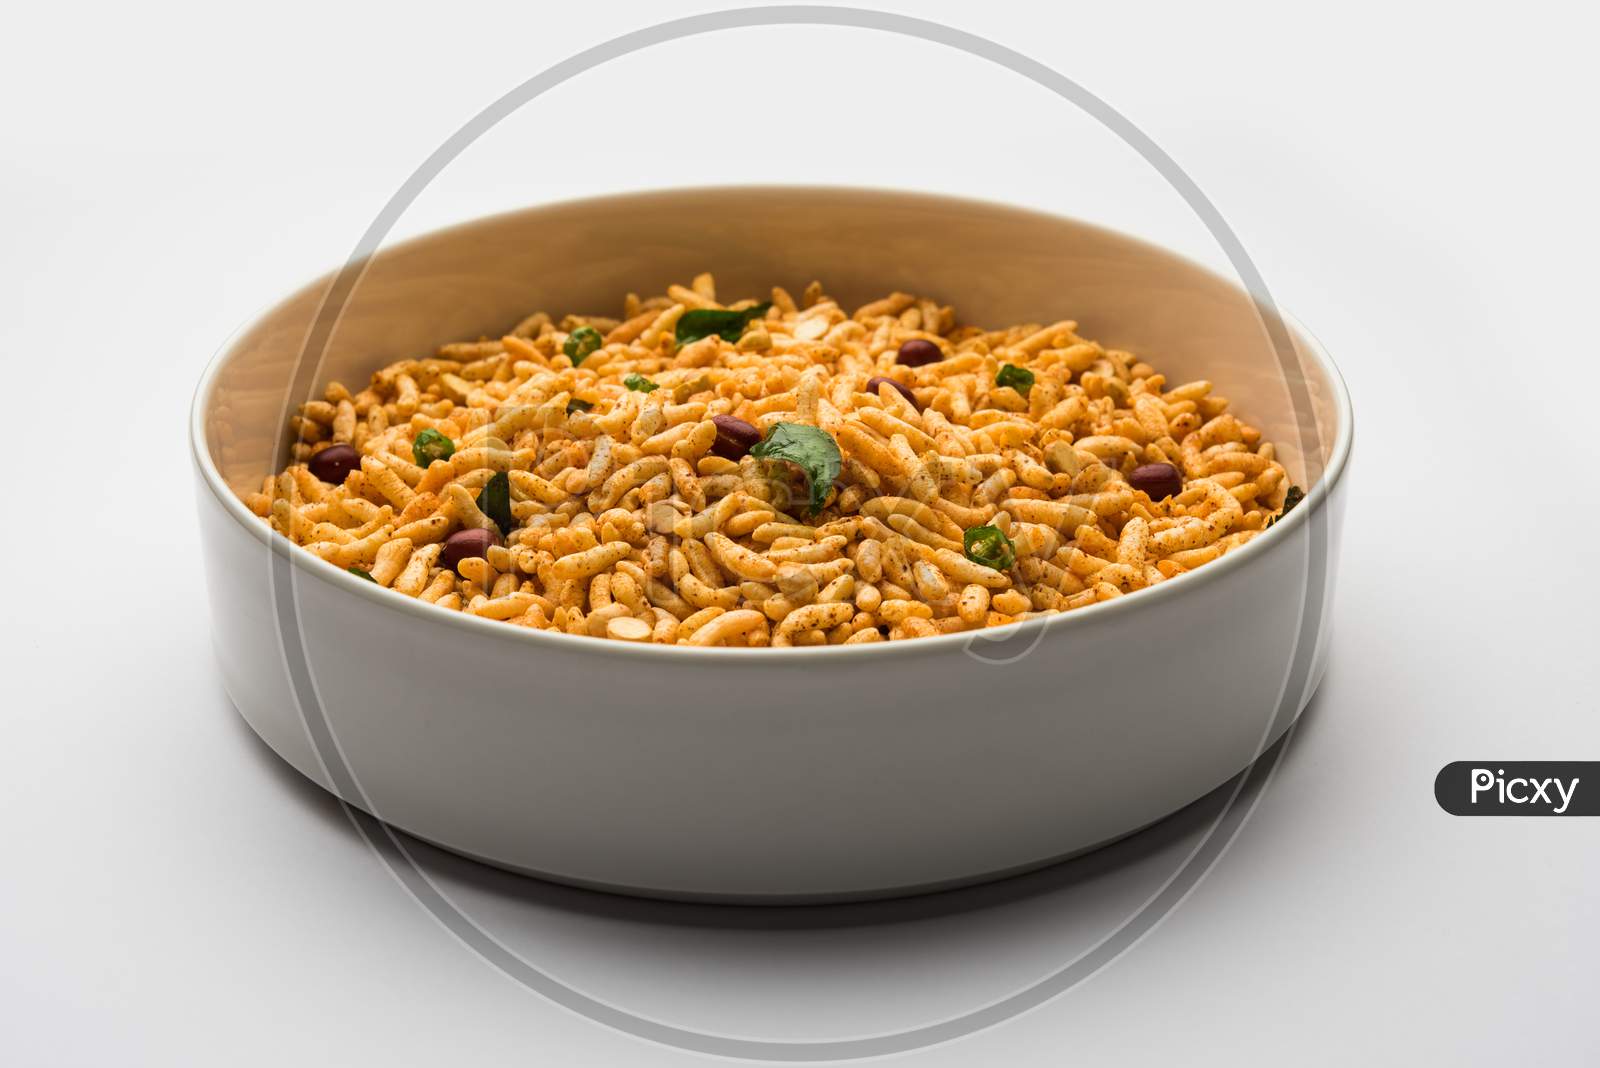 Bhadang Chivda Is A Spicy And Savory Snack From Maharashtra, India. Made Using Puffed Rice